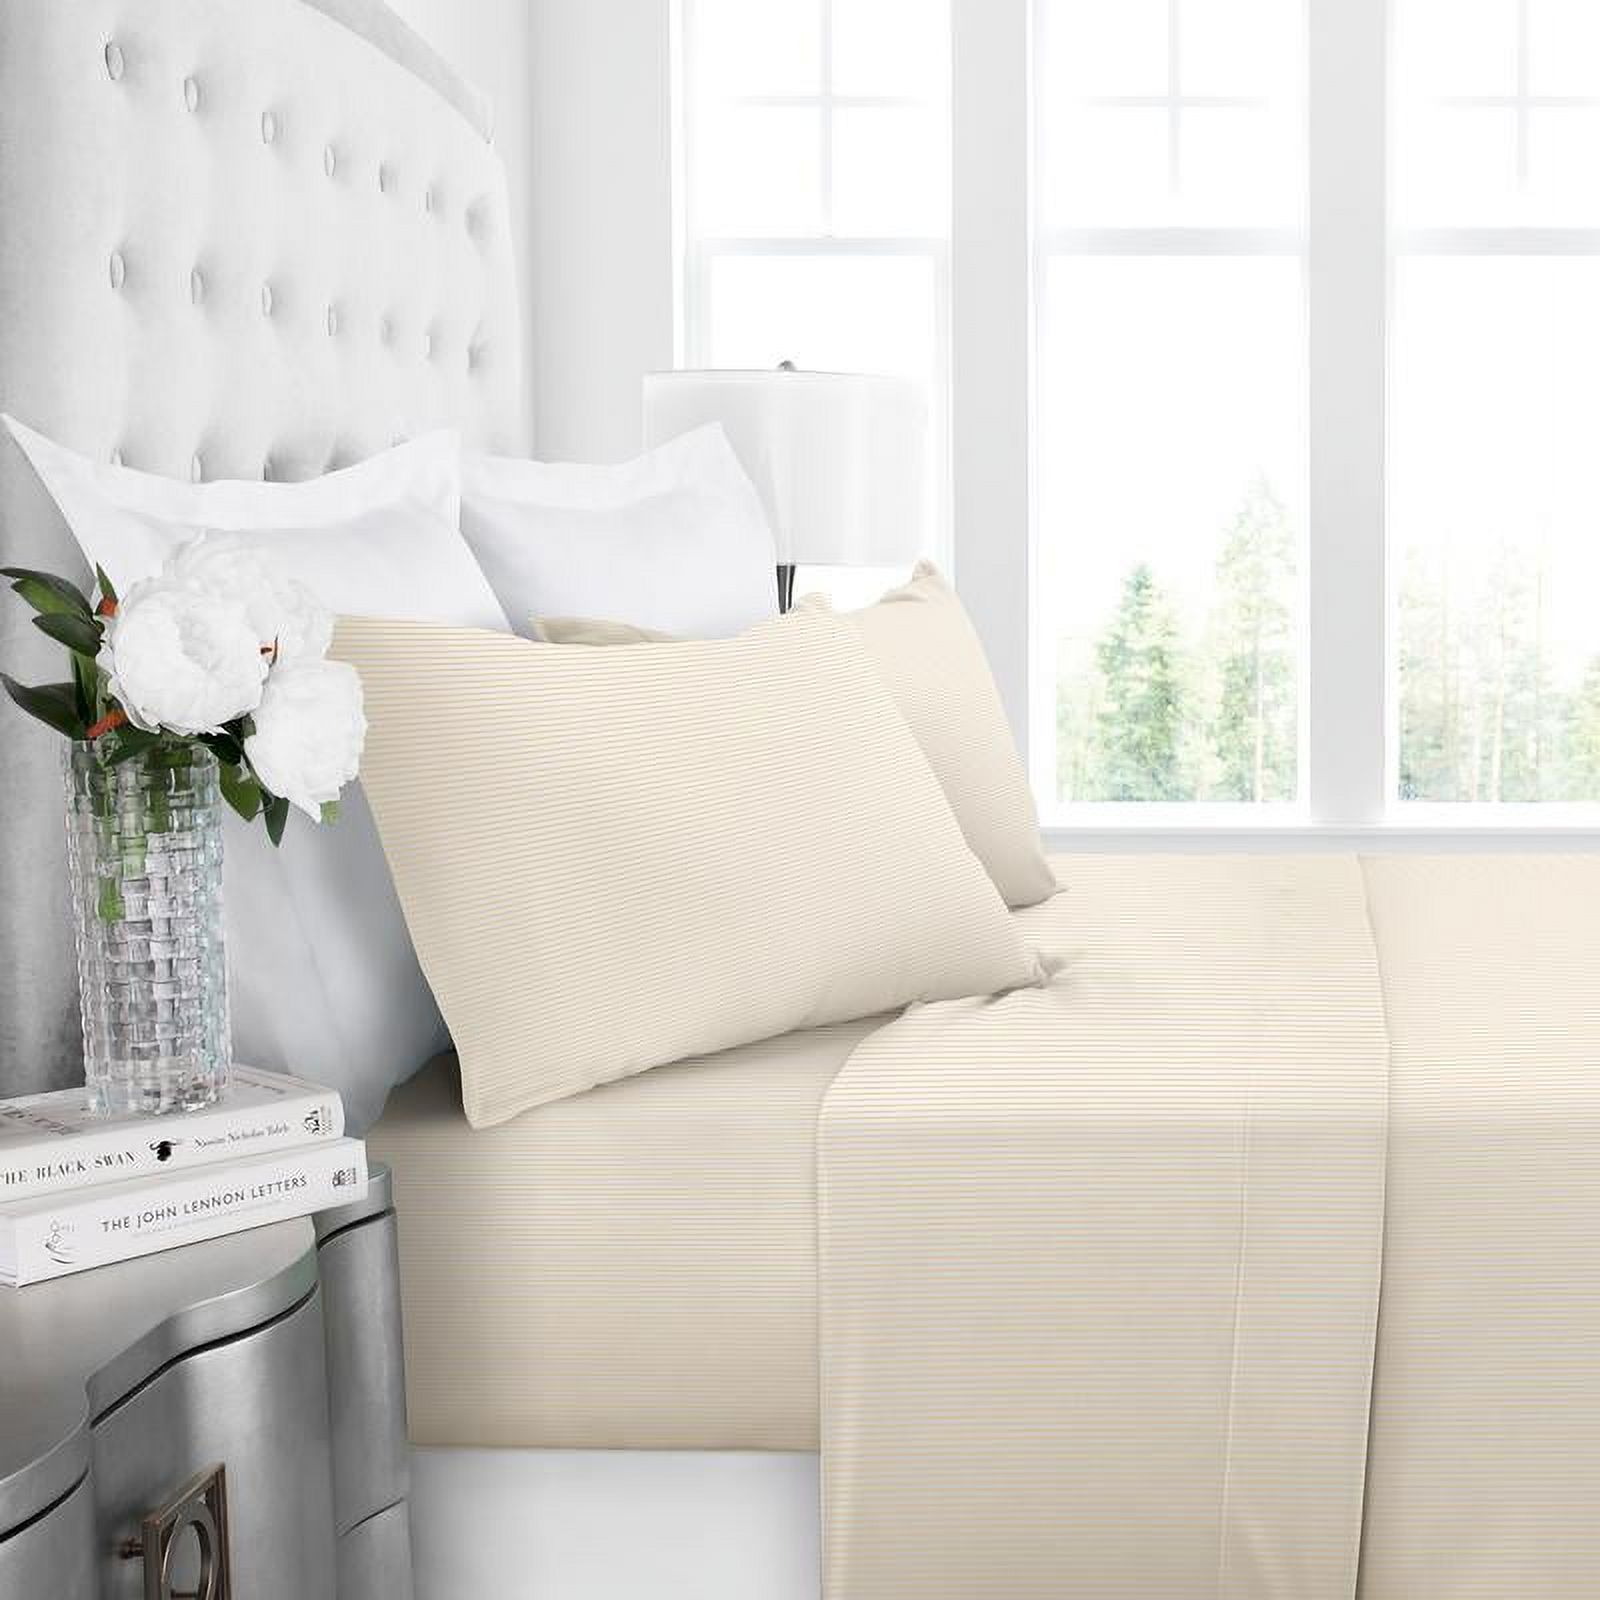 Noble Linen's 4 Piece Sheet Set with Pinstripe Pattern - image 1 of 4